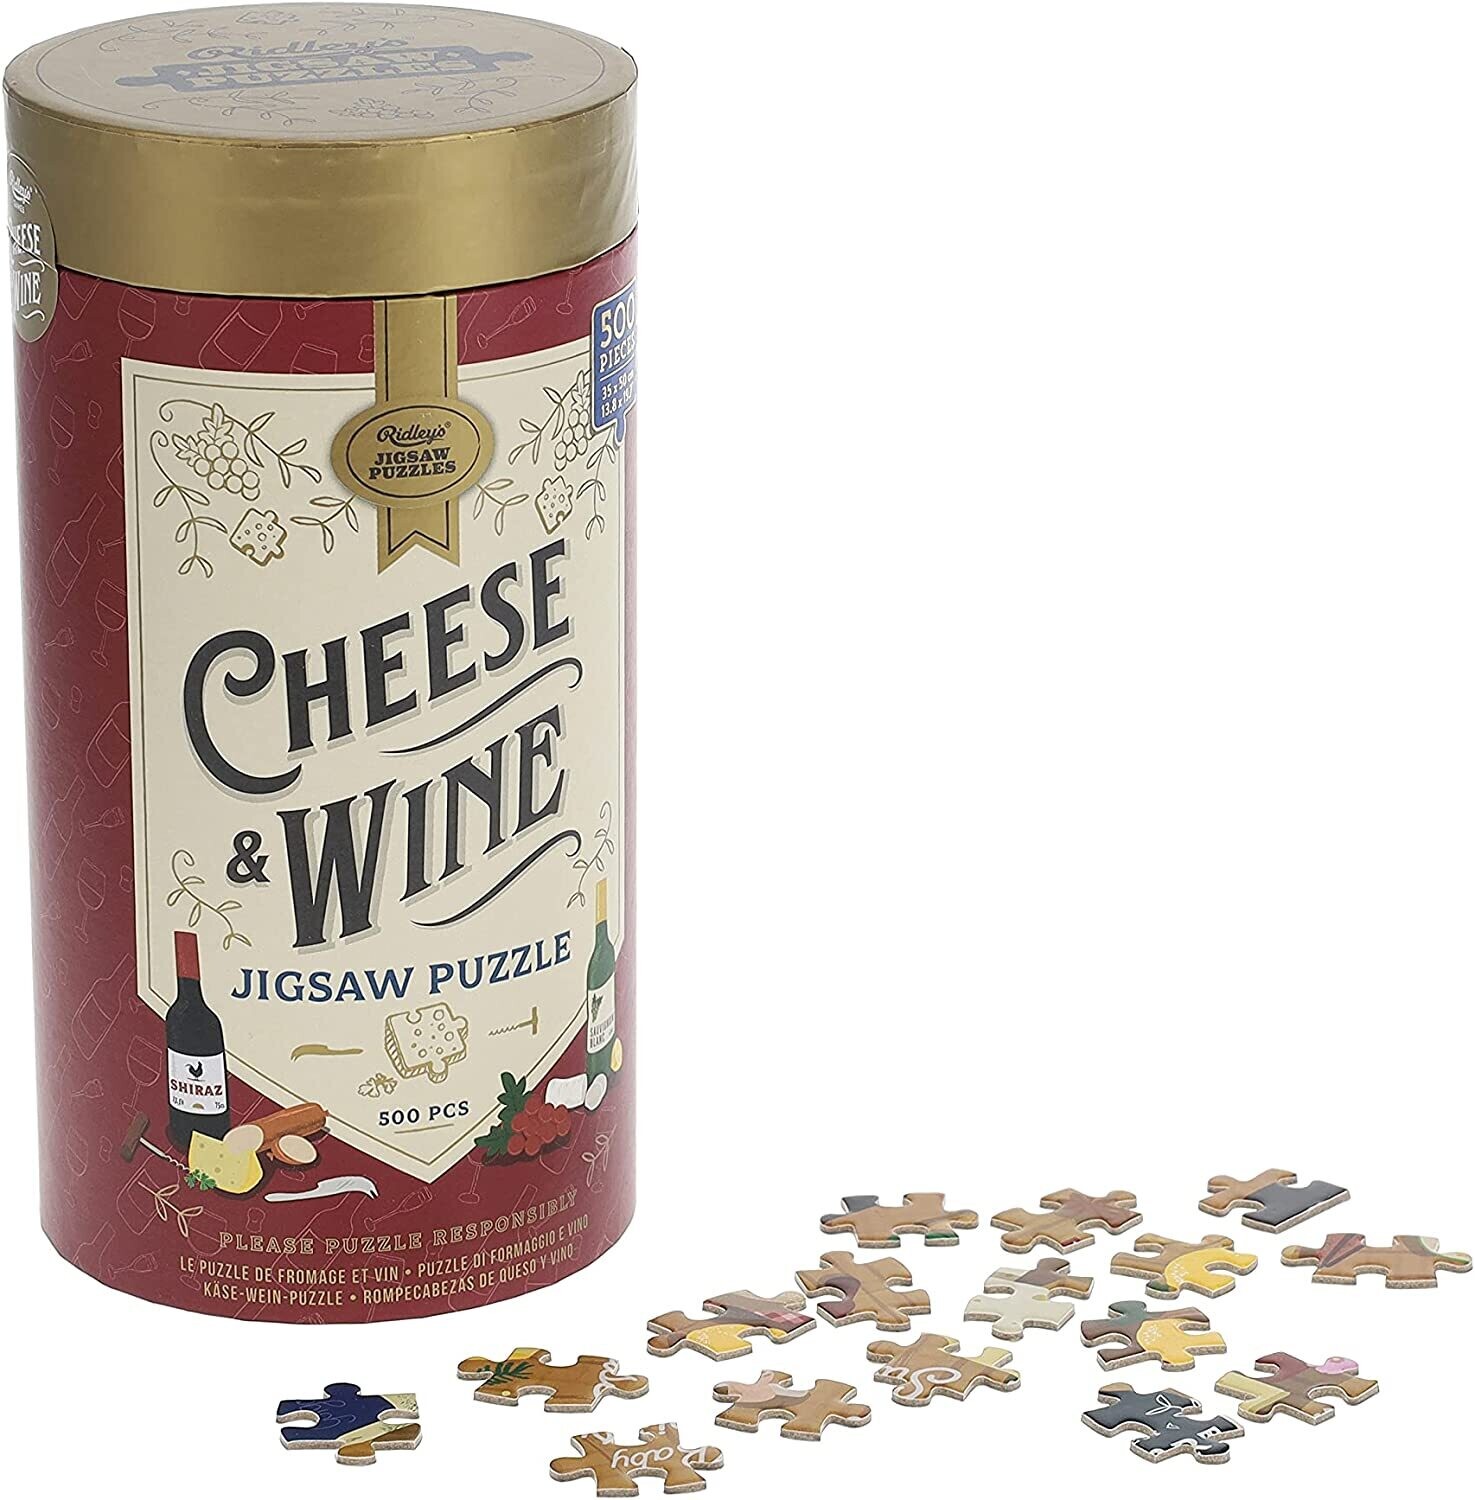 Cheese + Wine Jigsaw Puzzle 500pc